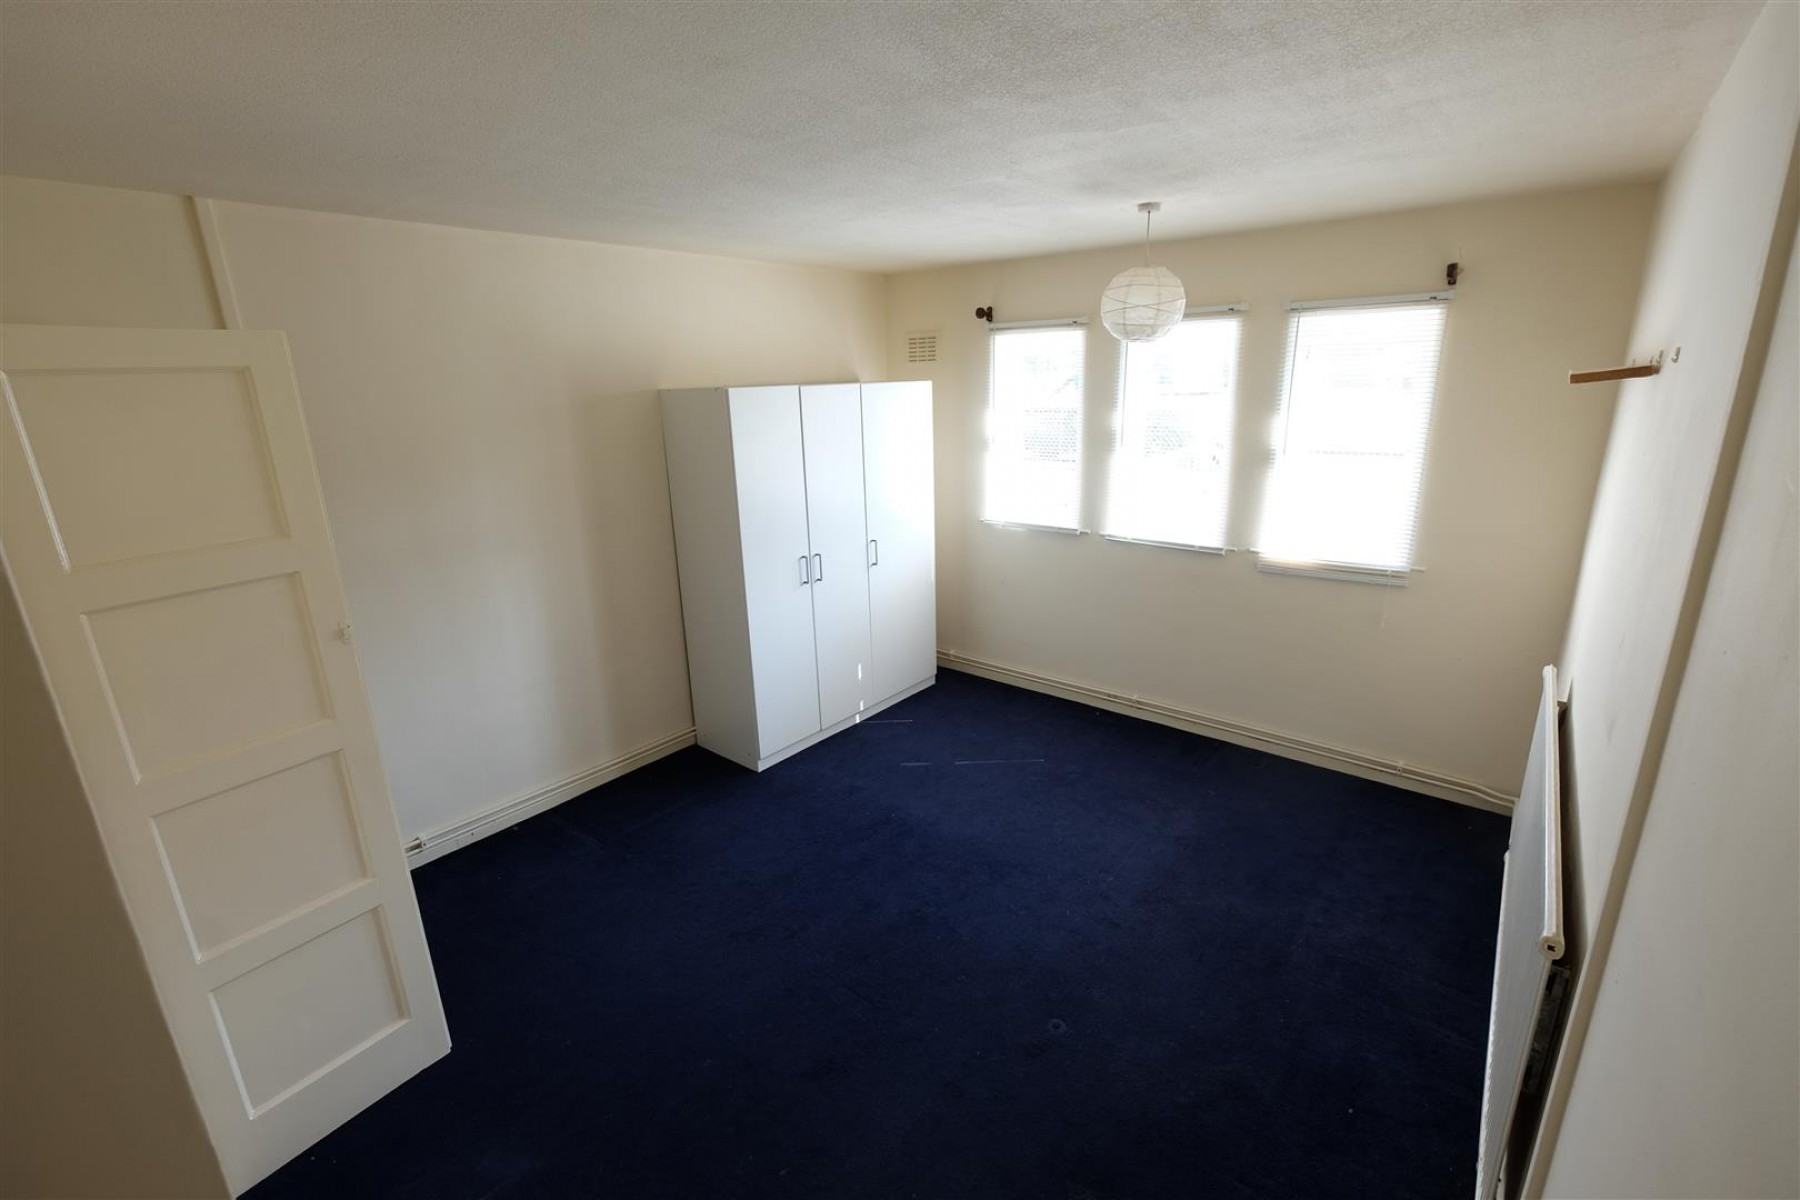 Images for 2 Bed Flat @ Butterfield Close